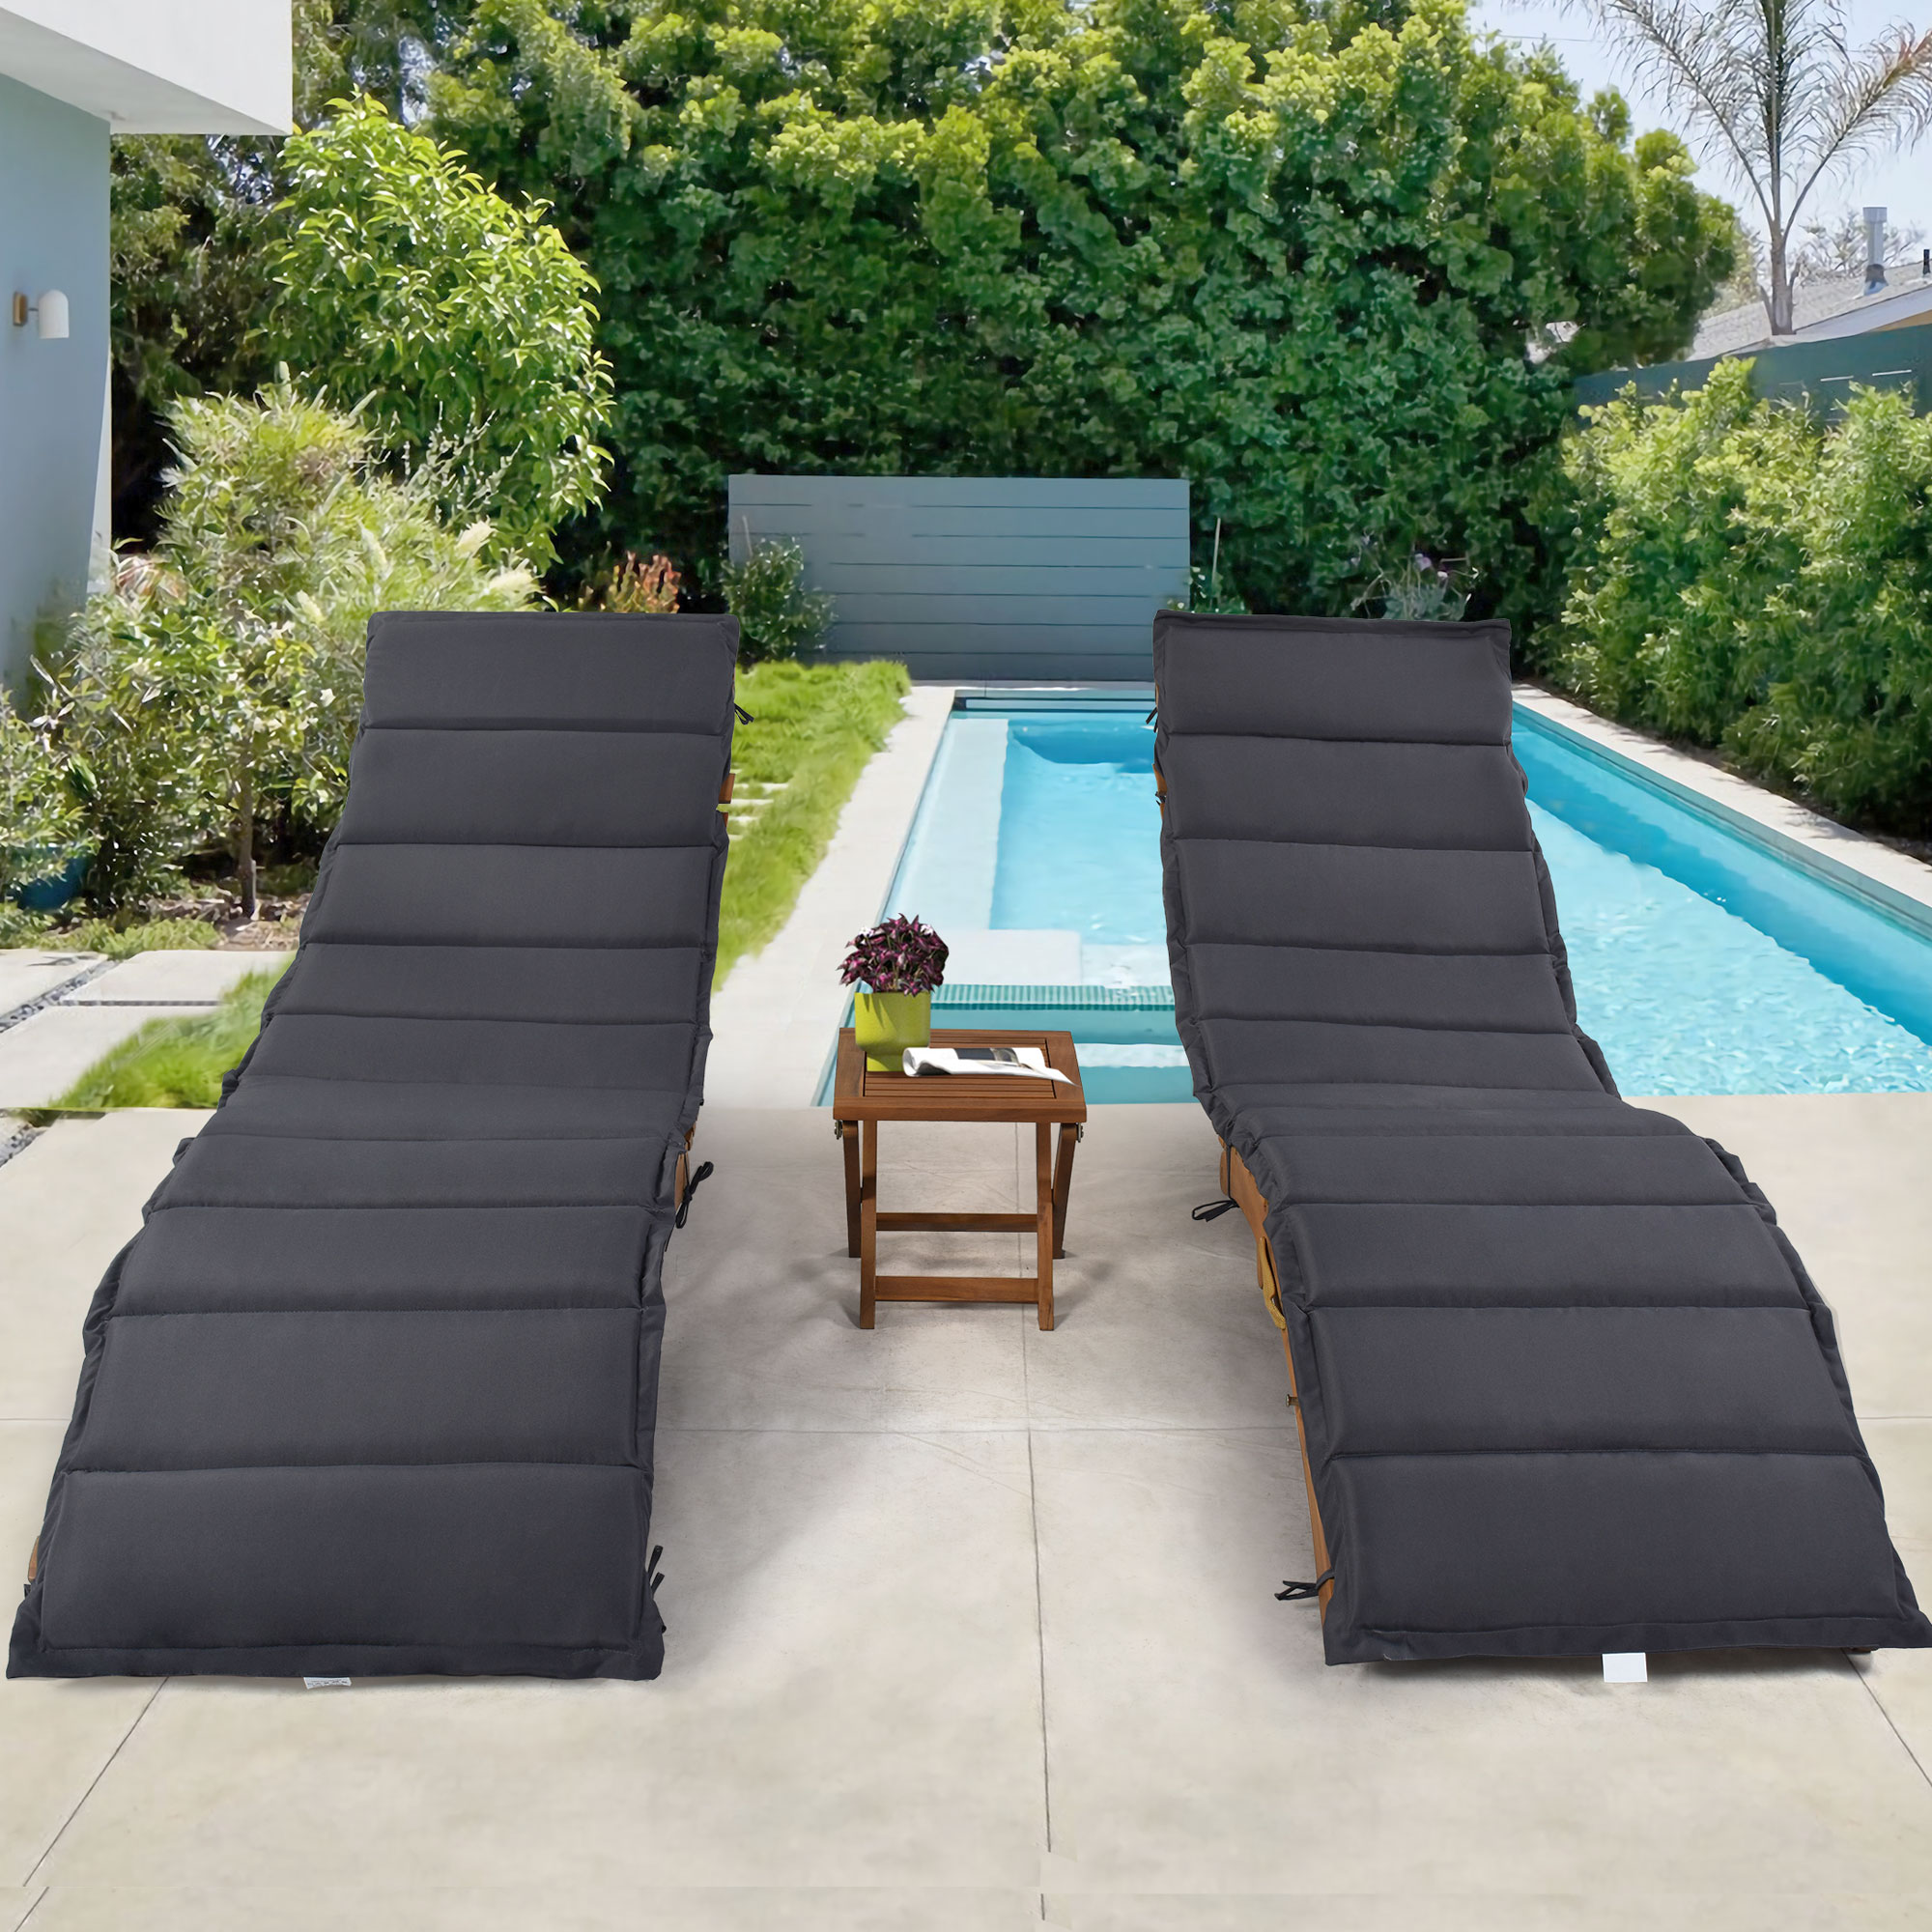 ENYOPRO Patio Lounge Chairs Set of 3, Outdoor Wood Portable Chaise Lounge Chairs with Foldable Tea Table and Cushions, Fit for Pool Porch Backyard Patio, Brown Finish + Dark Gray Cushion, K2702 - image 2 of 8